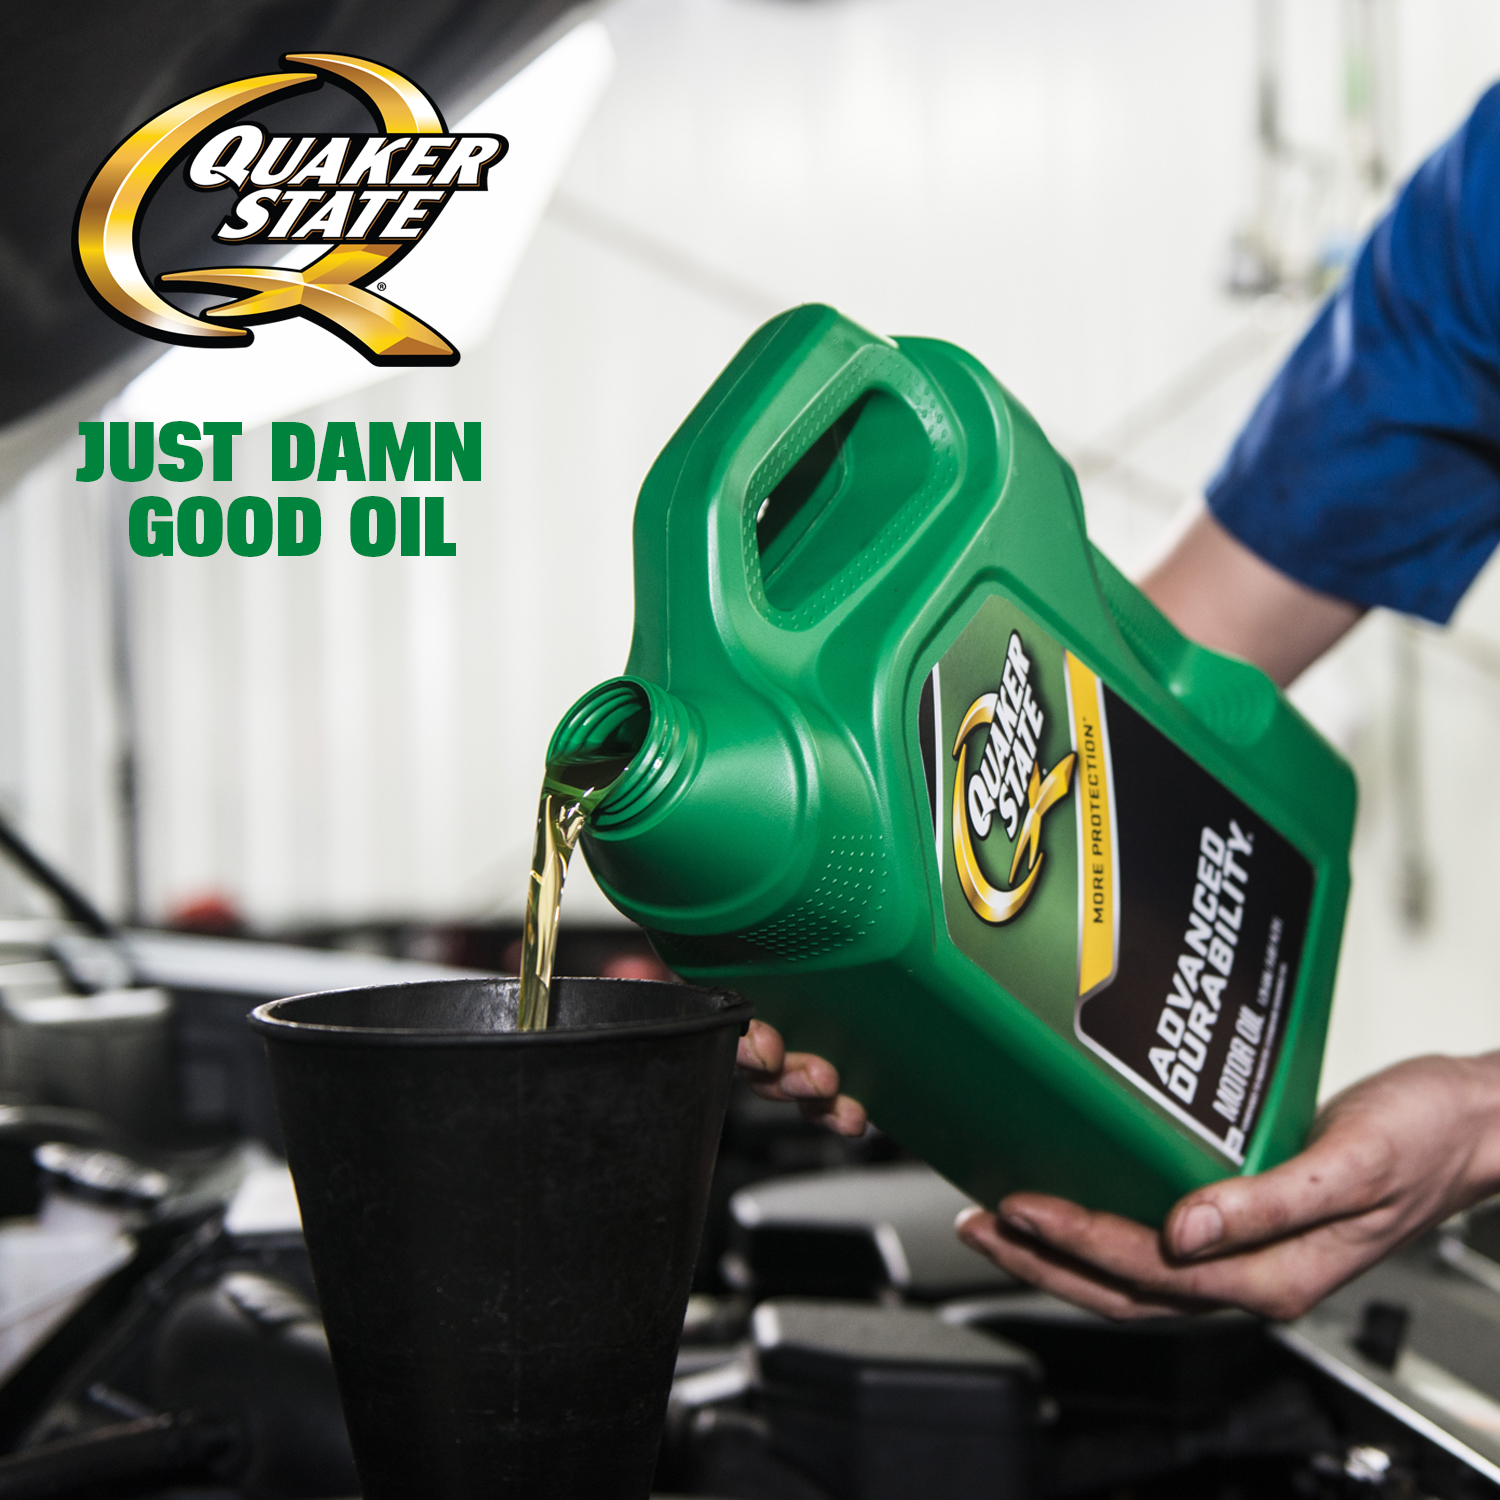 Quaker State High Mileage 10W-30 Synthetic Blend Motor Oil, 5 Quart - image 4 of 4